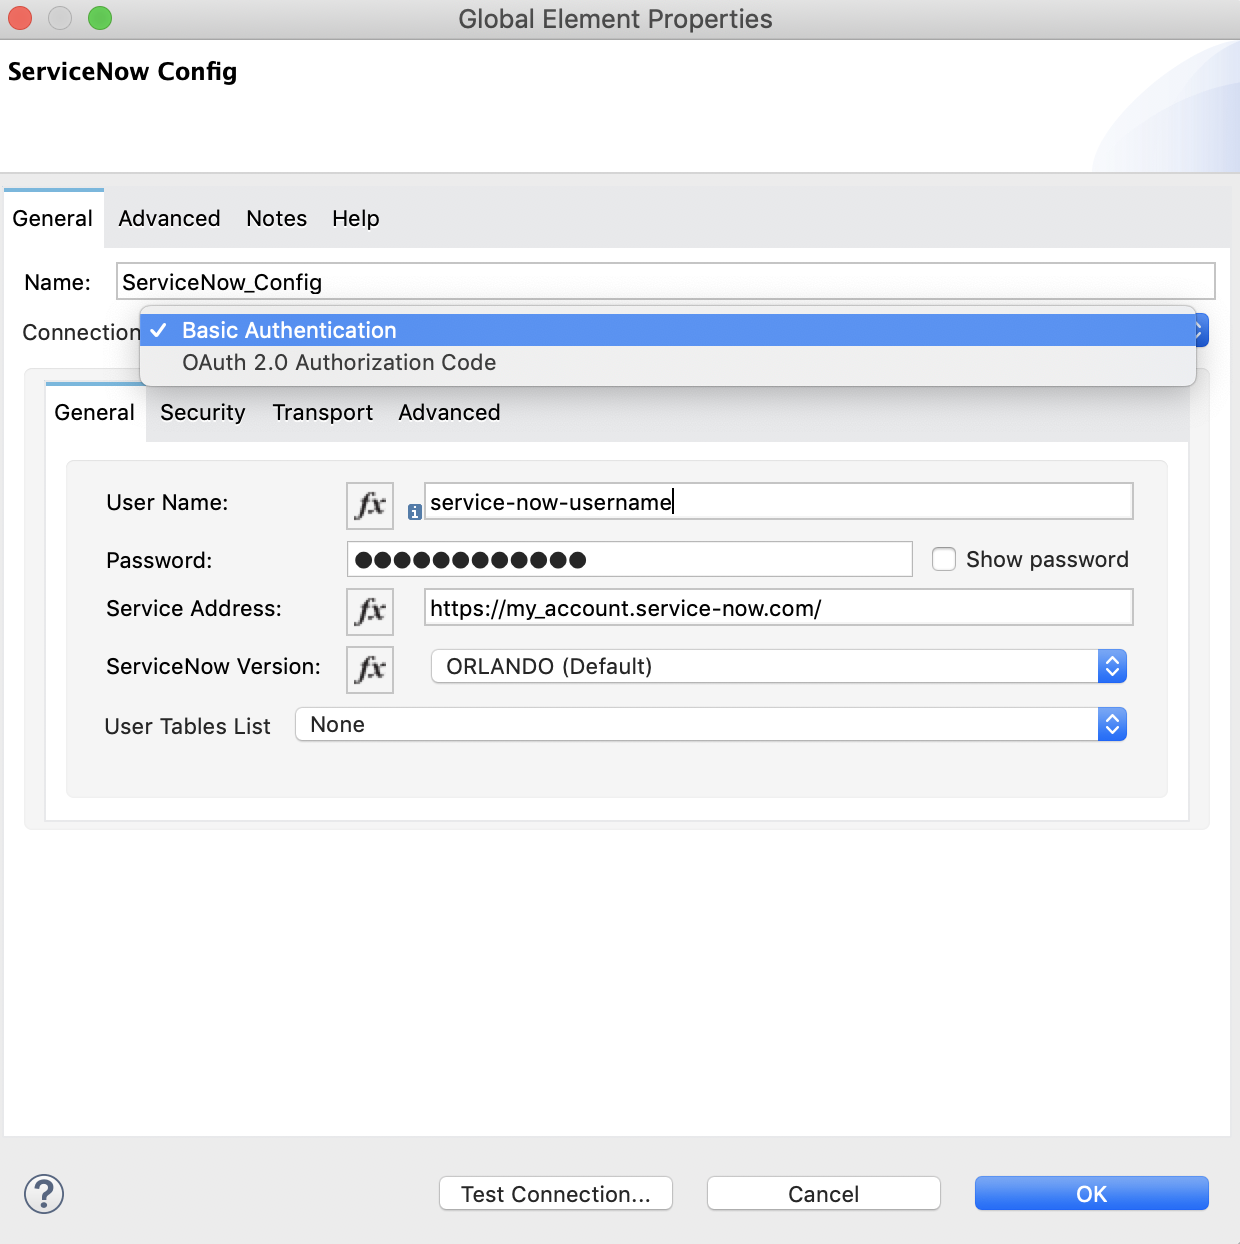 The global element connection settings with basic authentication selected